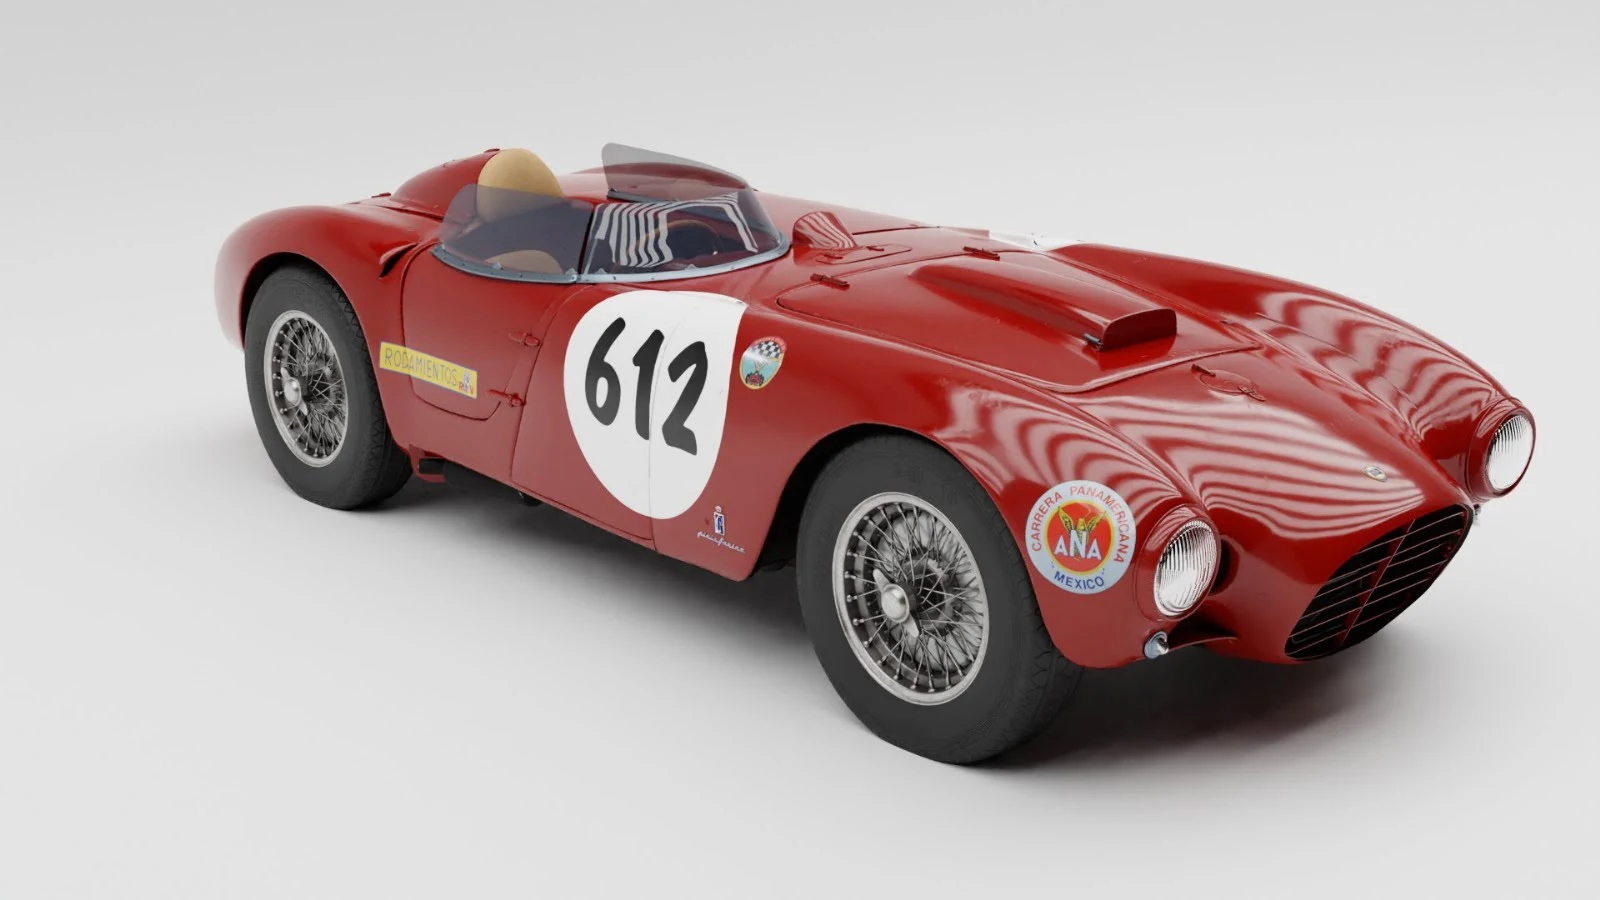 MAUTO and Roarington: one more big news. The digital twin of the Lancia D24 has arrived. Not to be missed. image